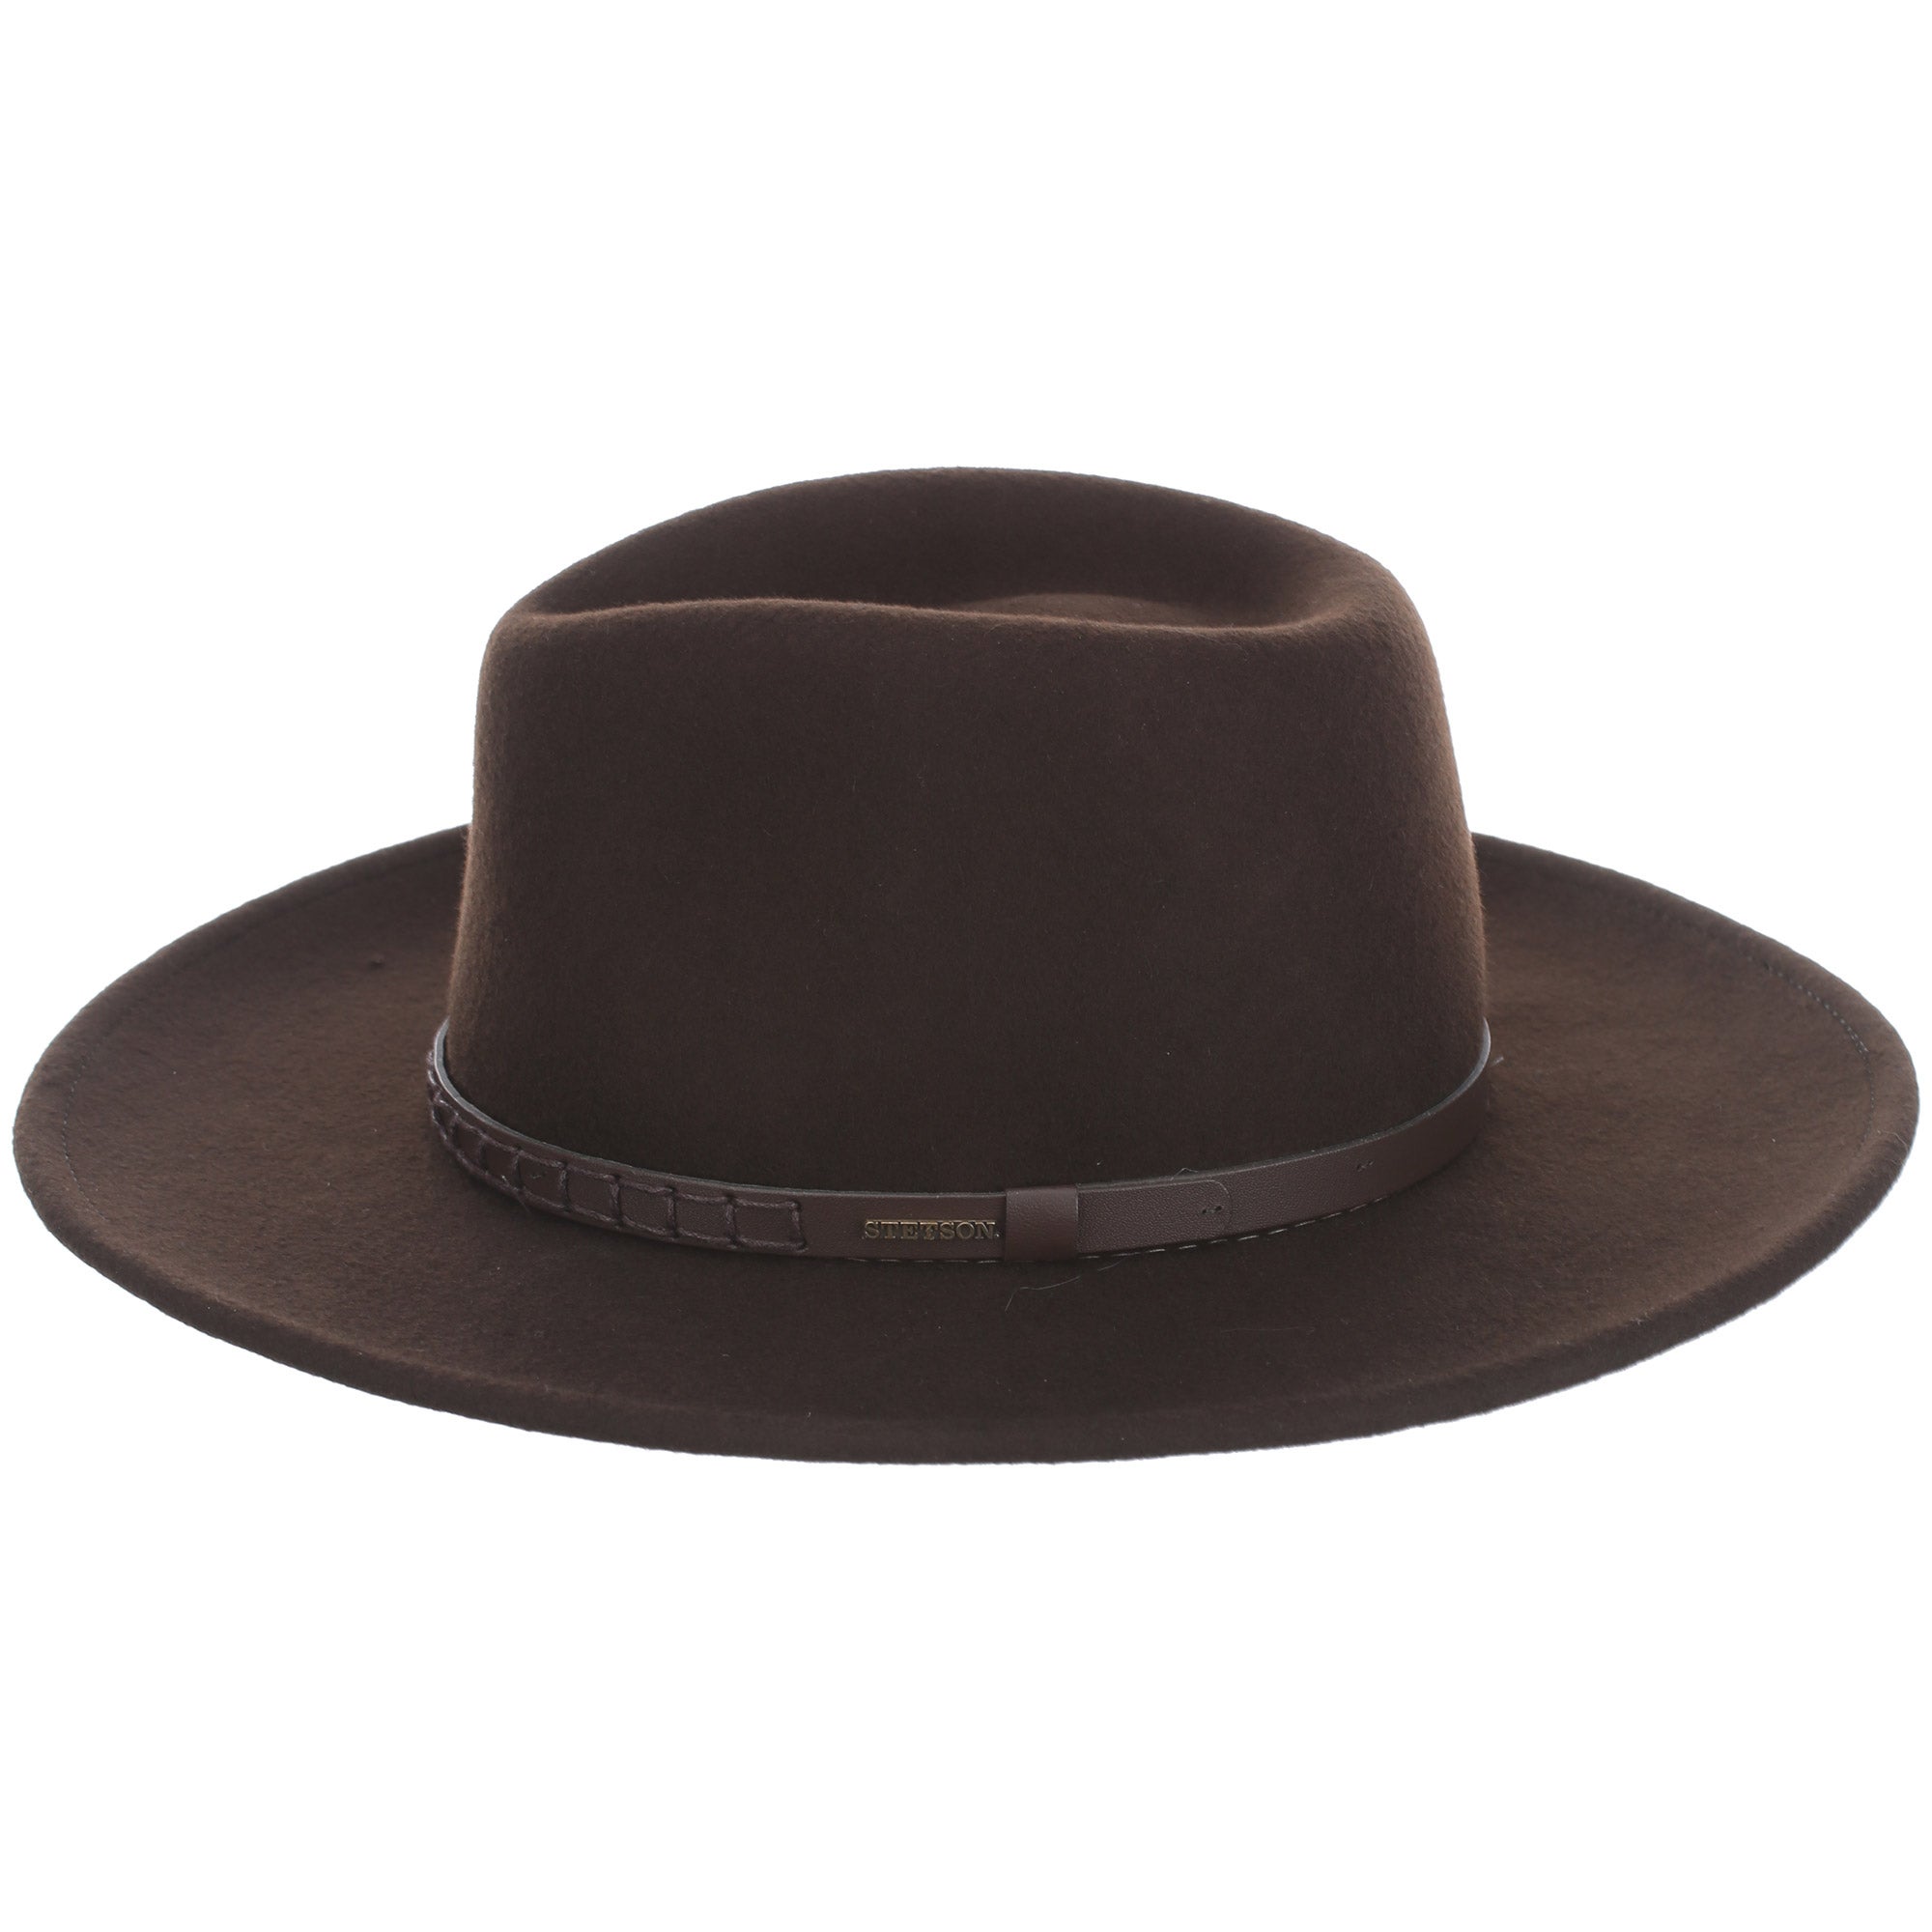 Stetson Sturgis Crushable Outdoor Collection Felt Hat - Riding Warehouse